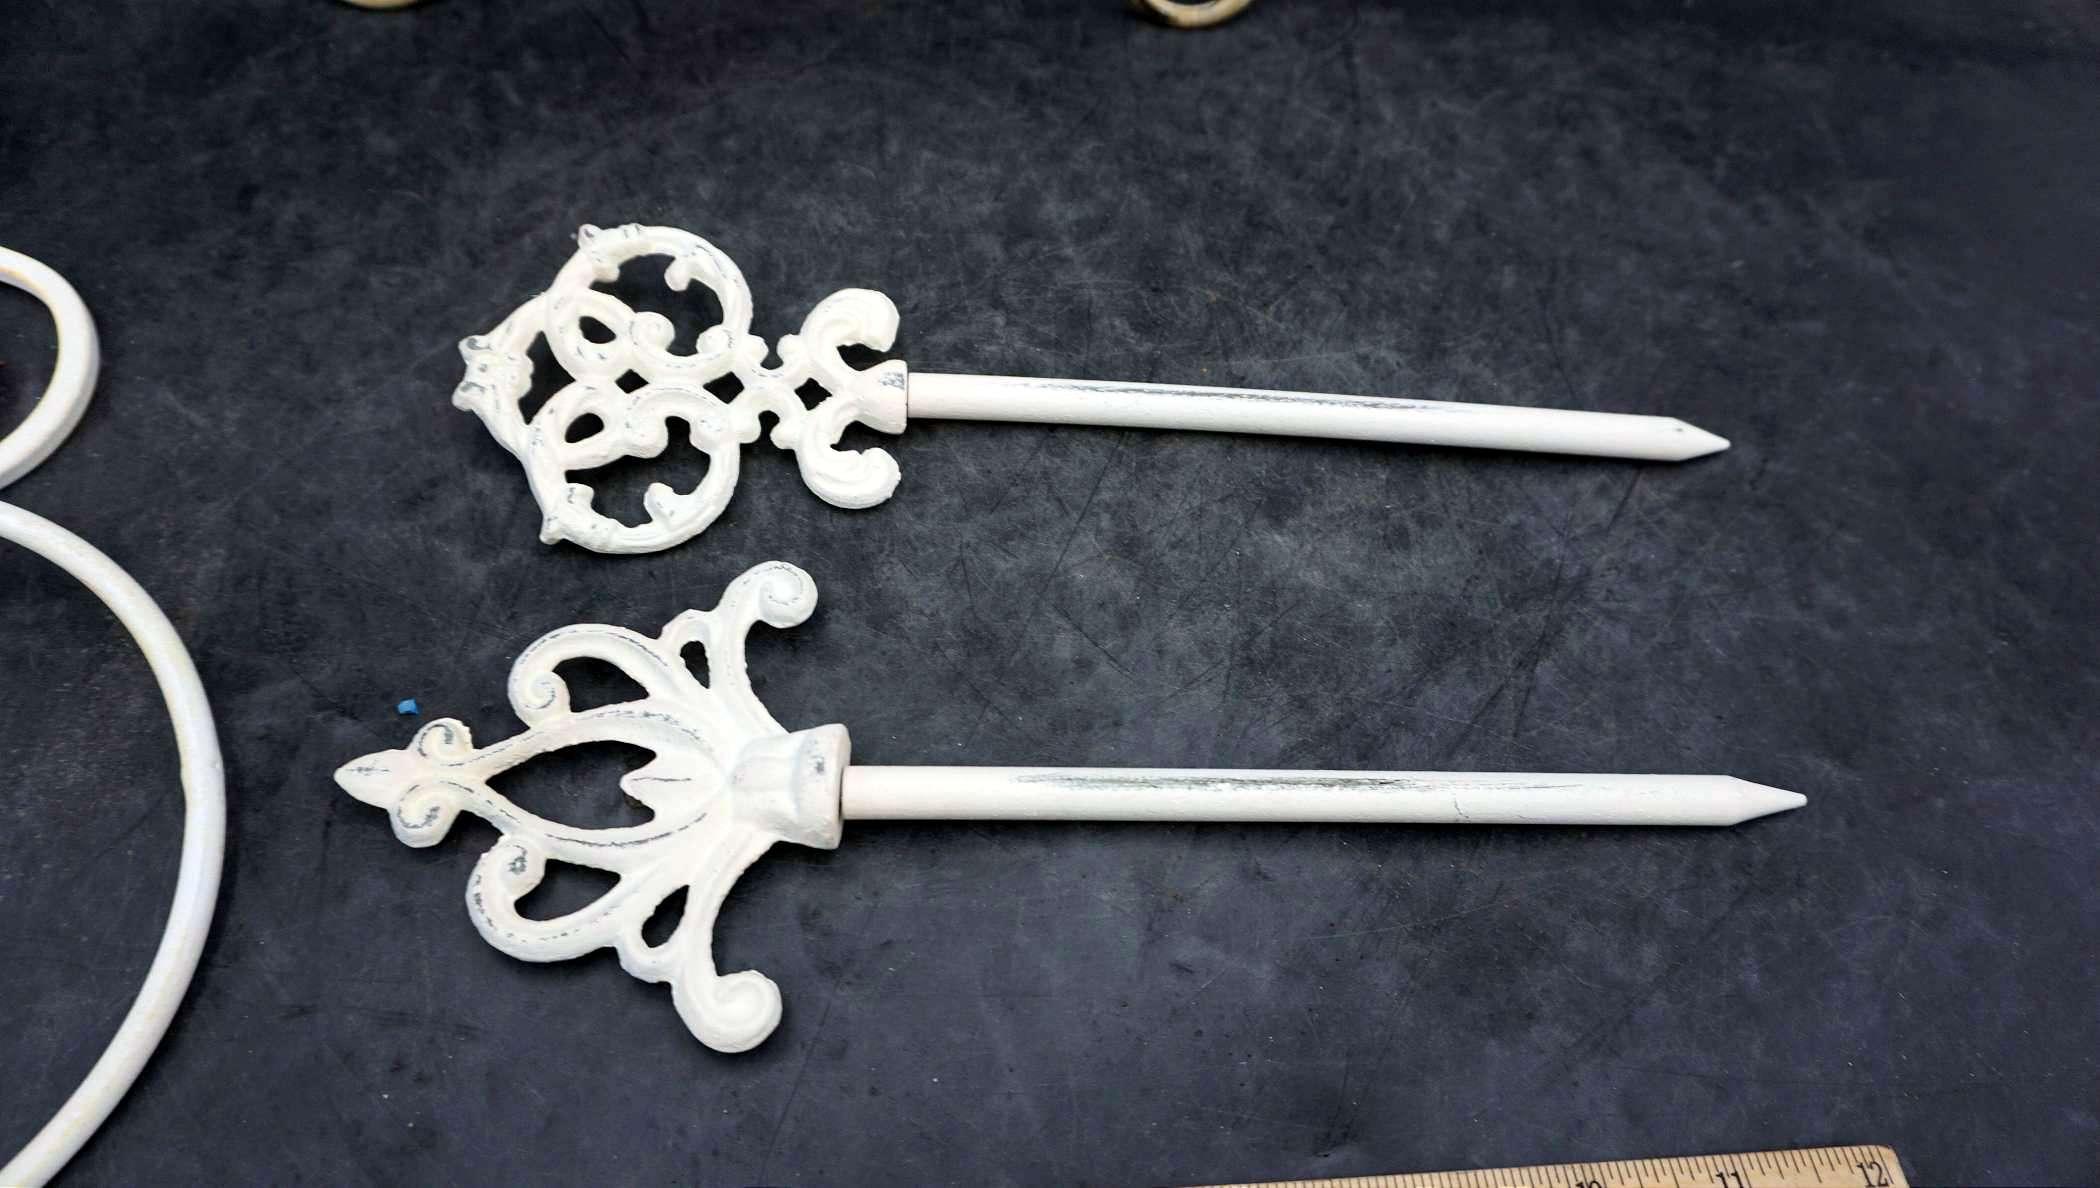 Metal Decorative Stand, Towel Holder & Stakes